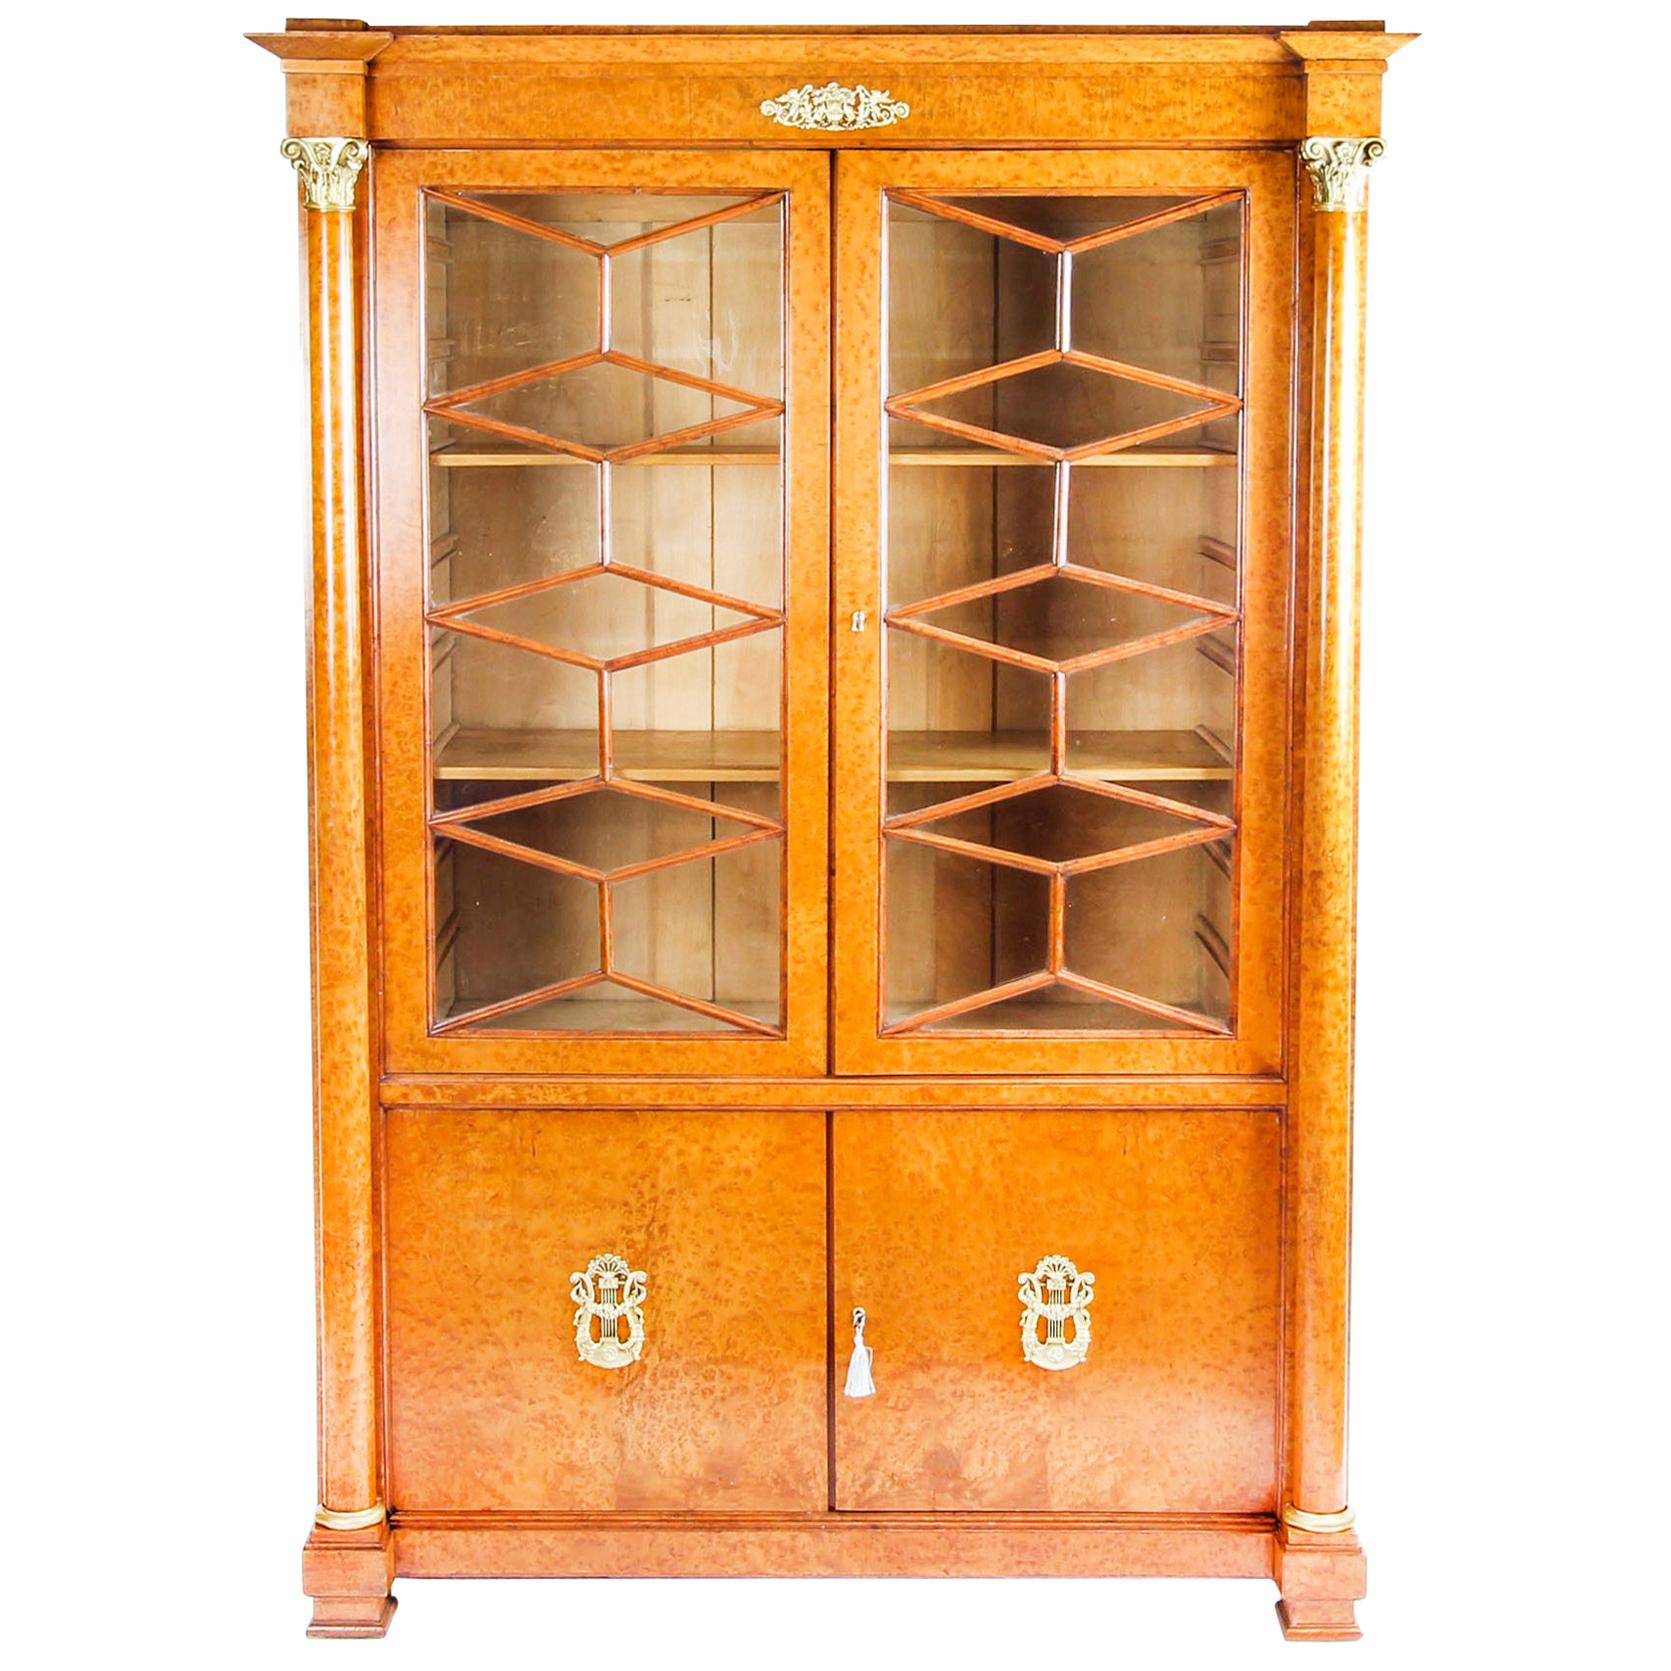 Antique French Charles X Burr Maple and Ormolu Bookcase, 19th Century